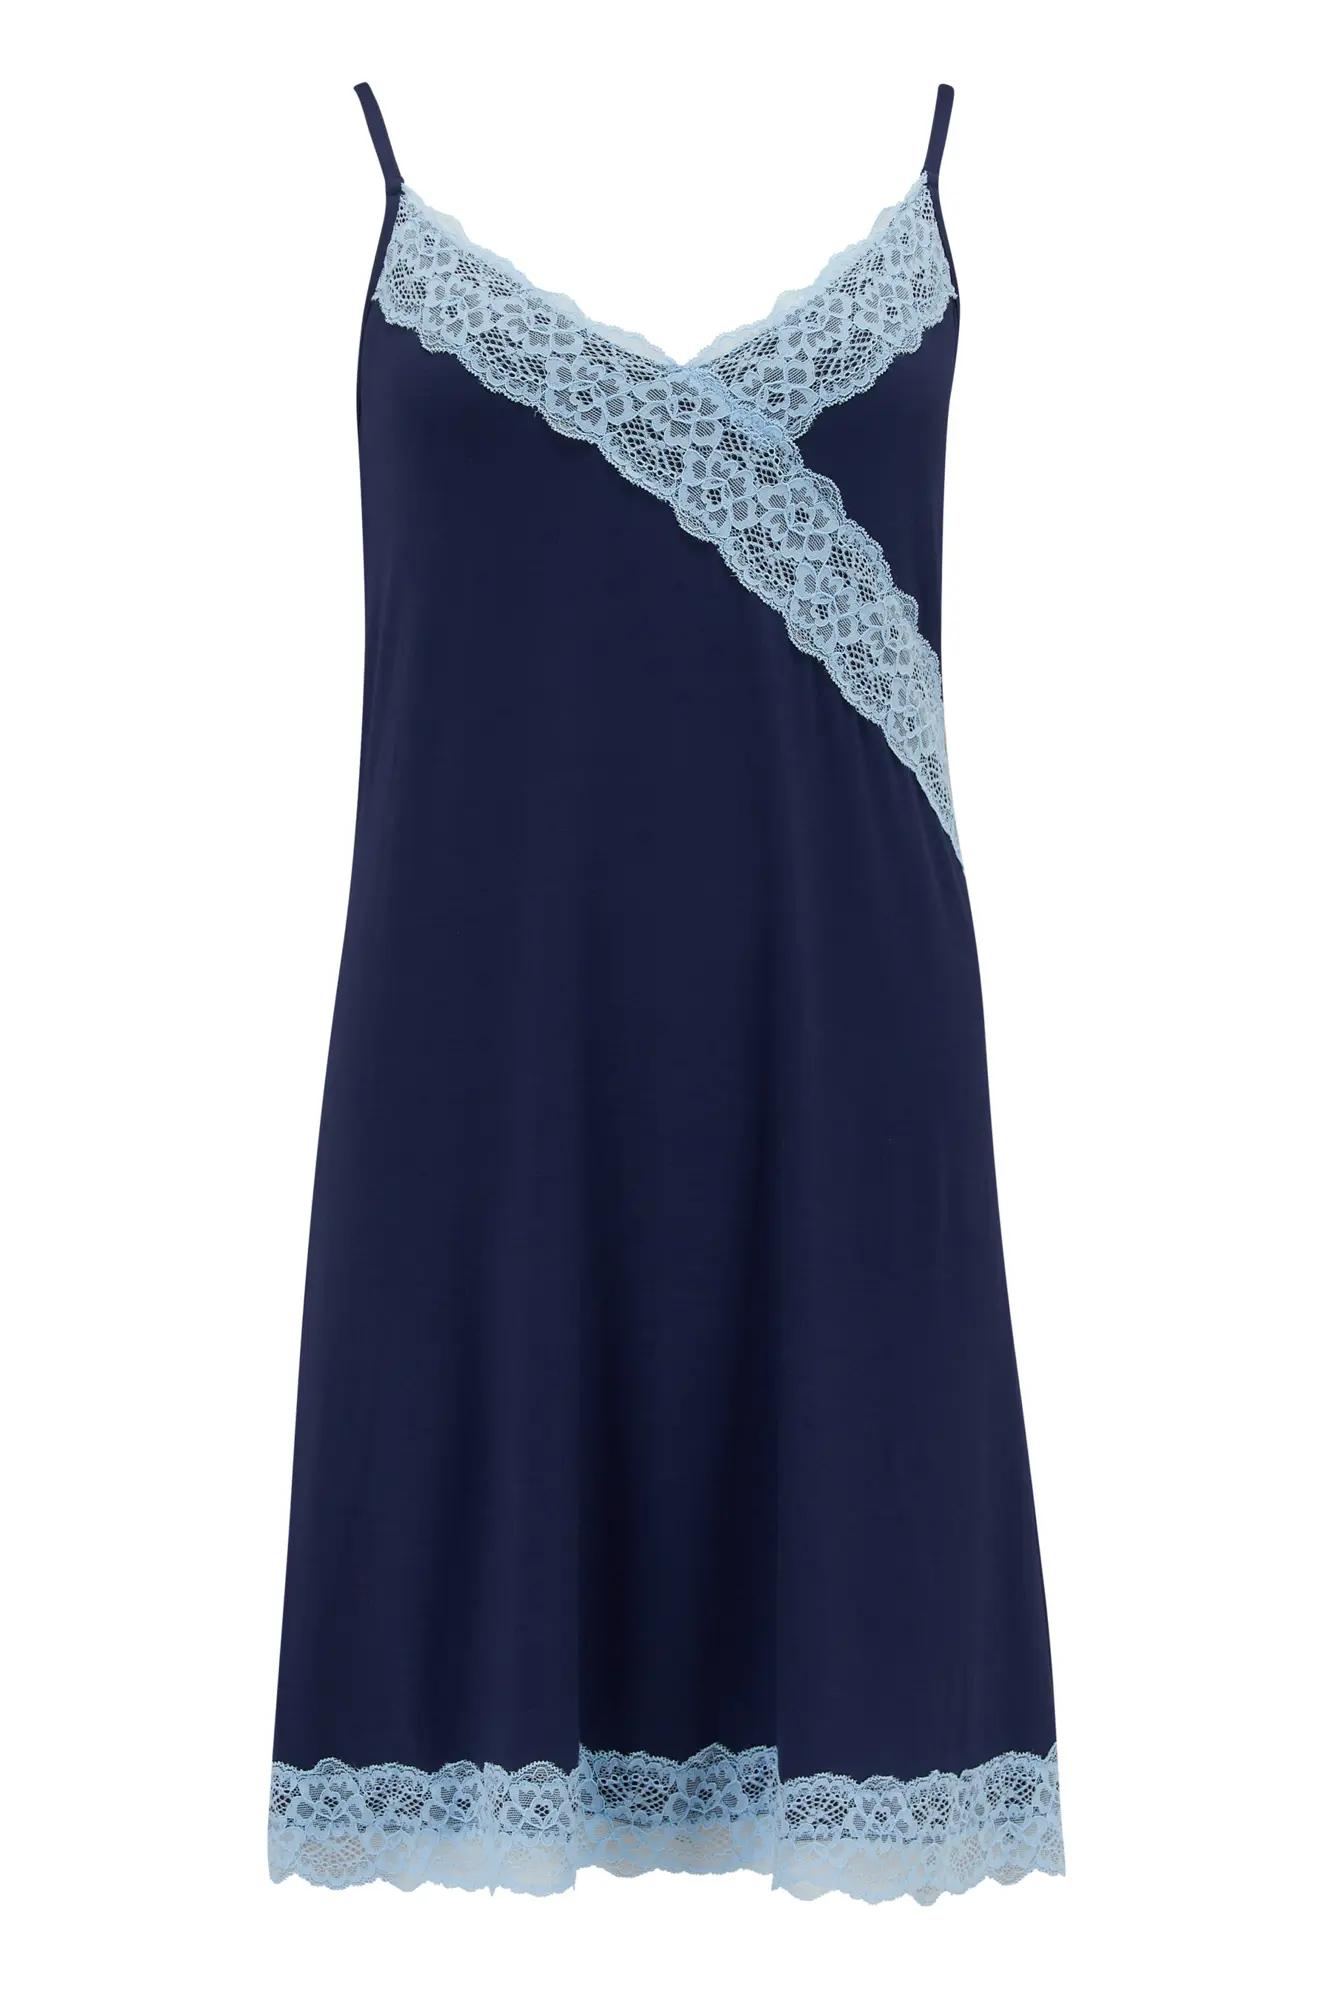 Sofa Loves Lace Hidden Support Soft Jersey Chemise | Navy/Blue | Pour Moi